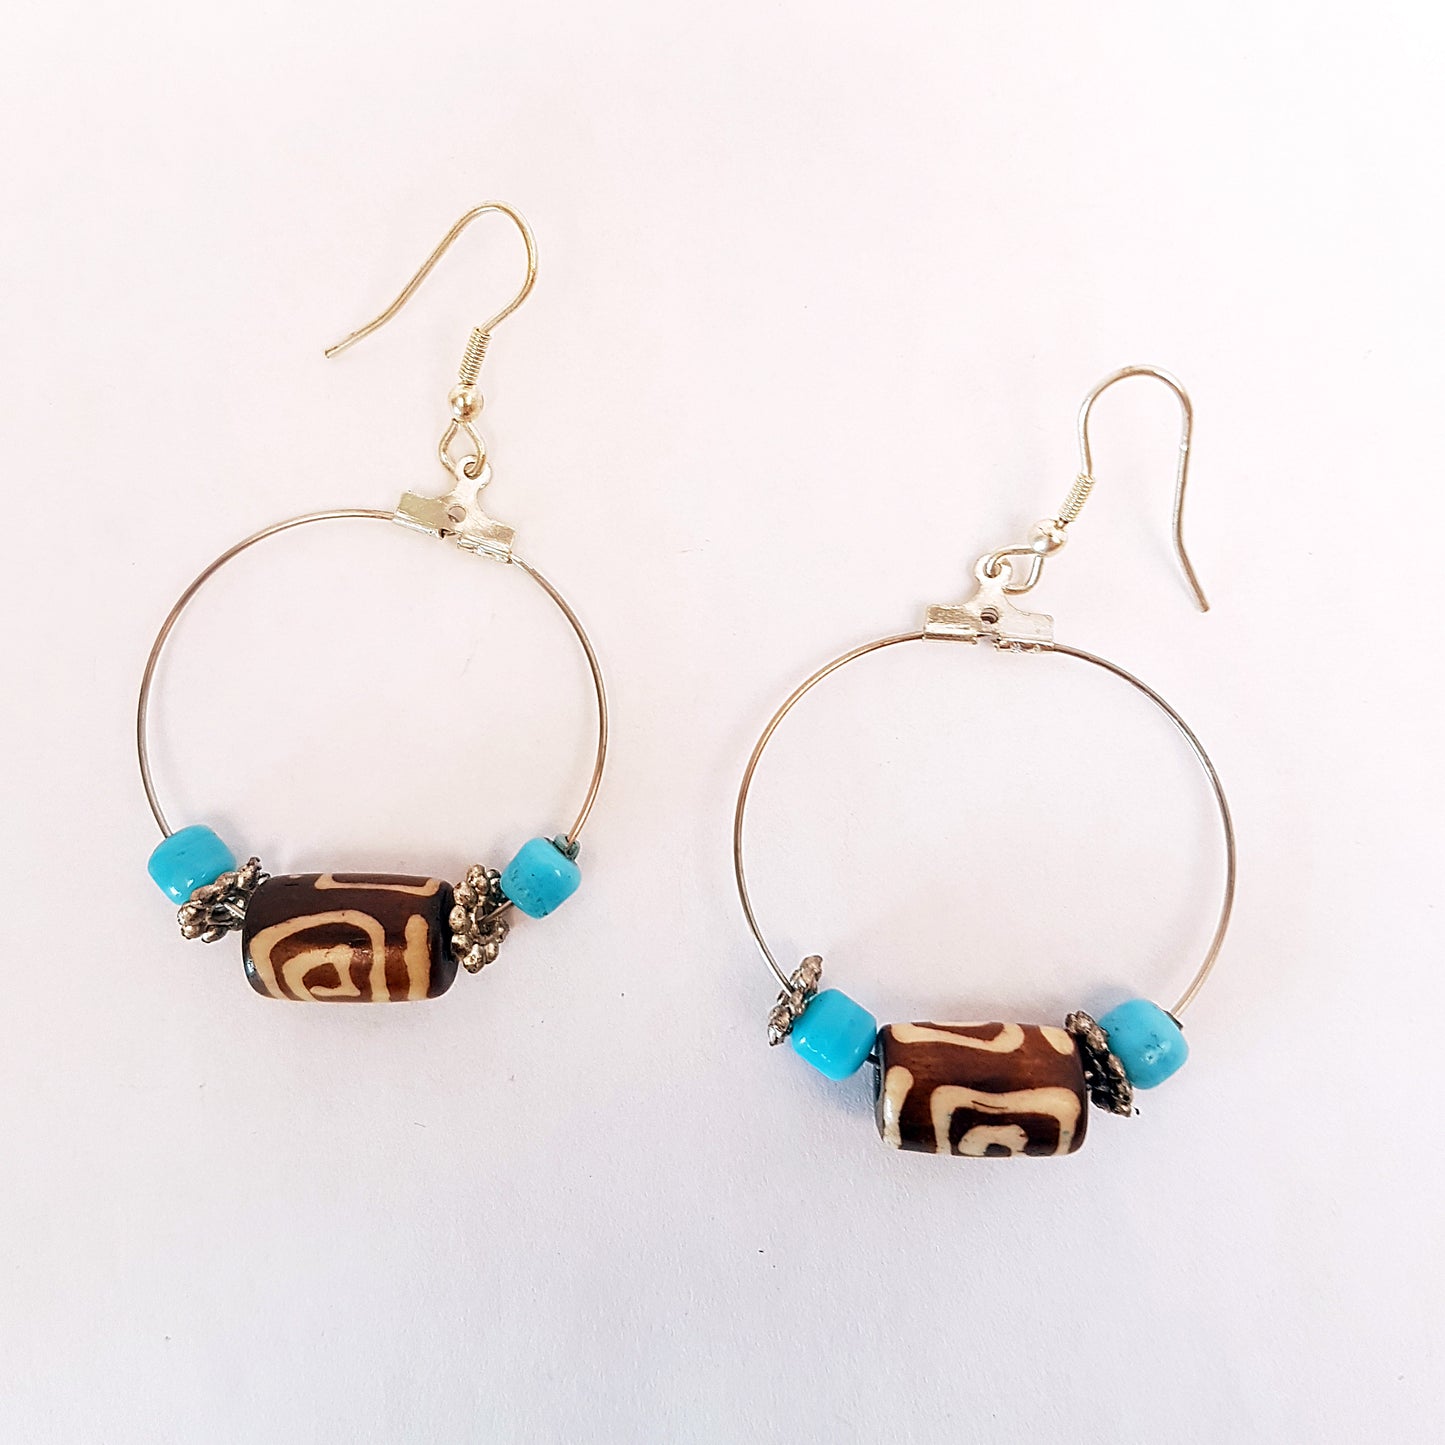 Silver hoop earrings with Dzi bead & small turquoise stones.